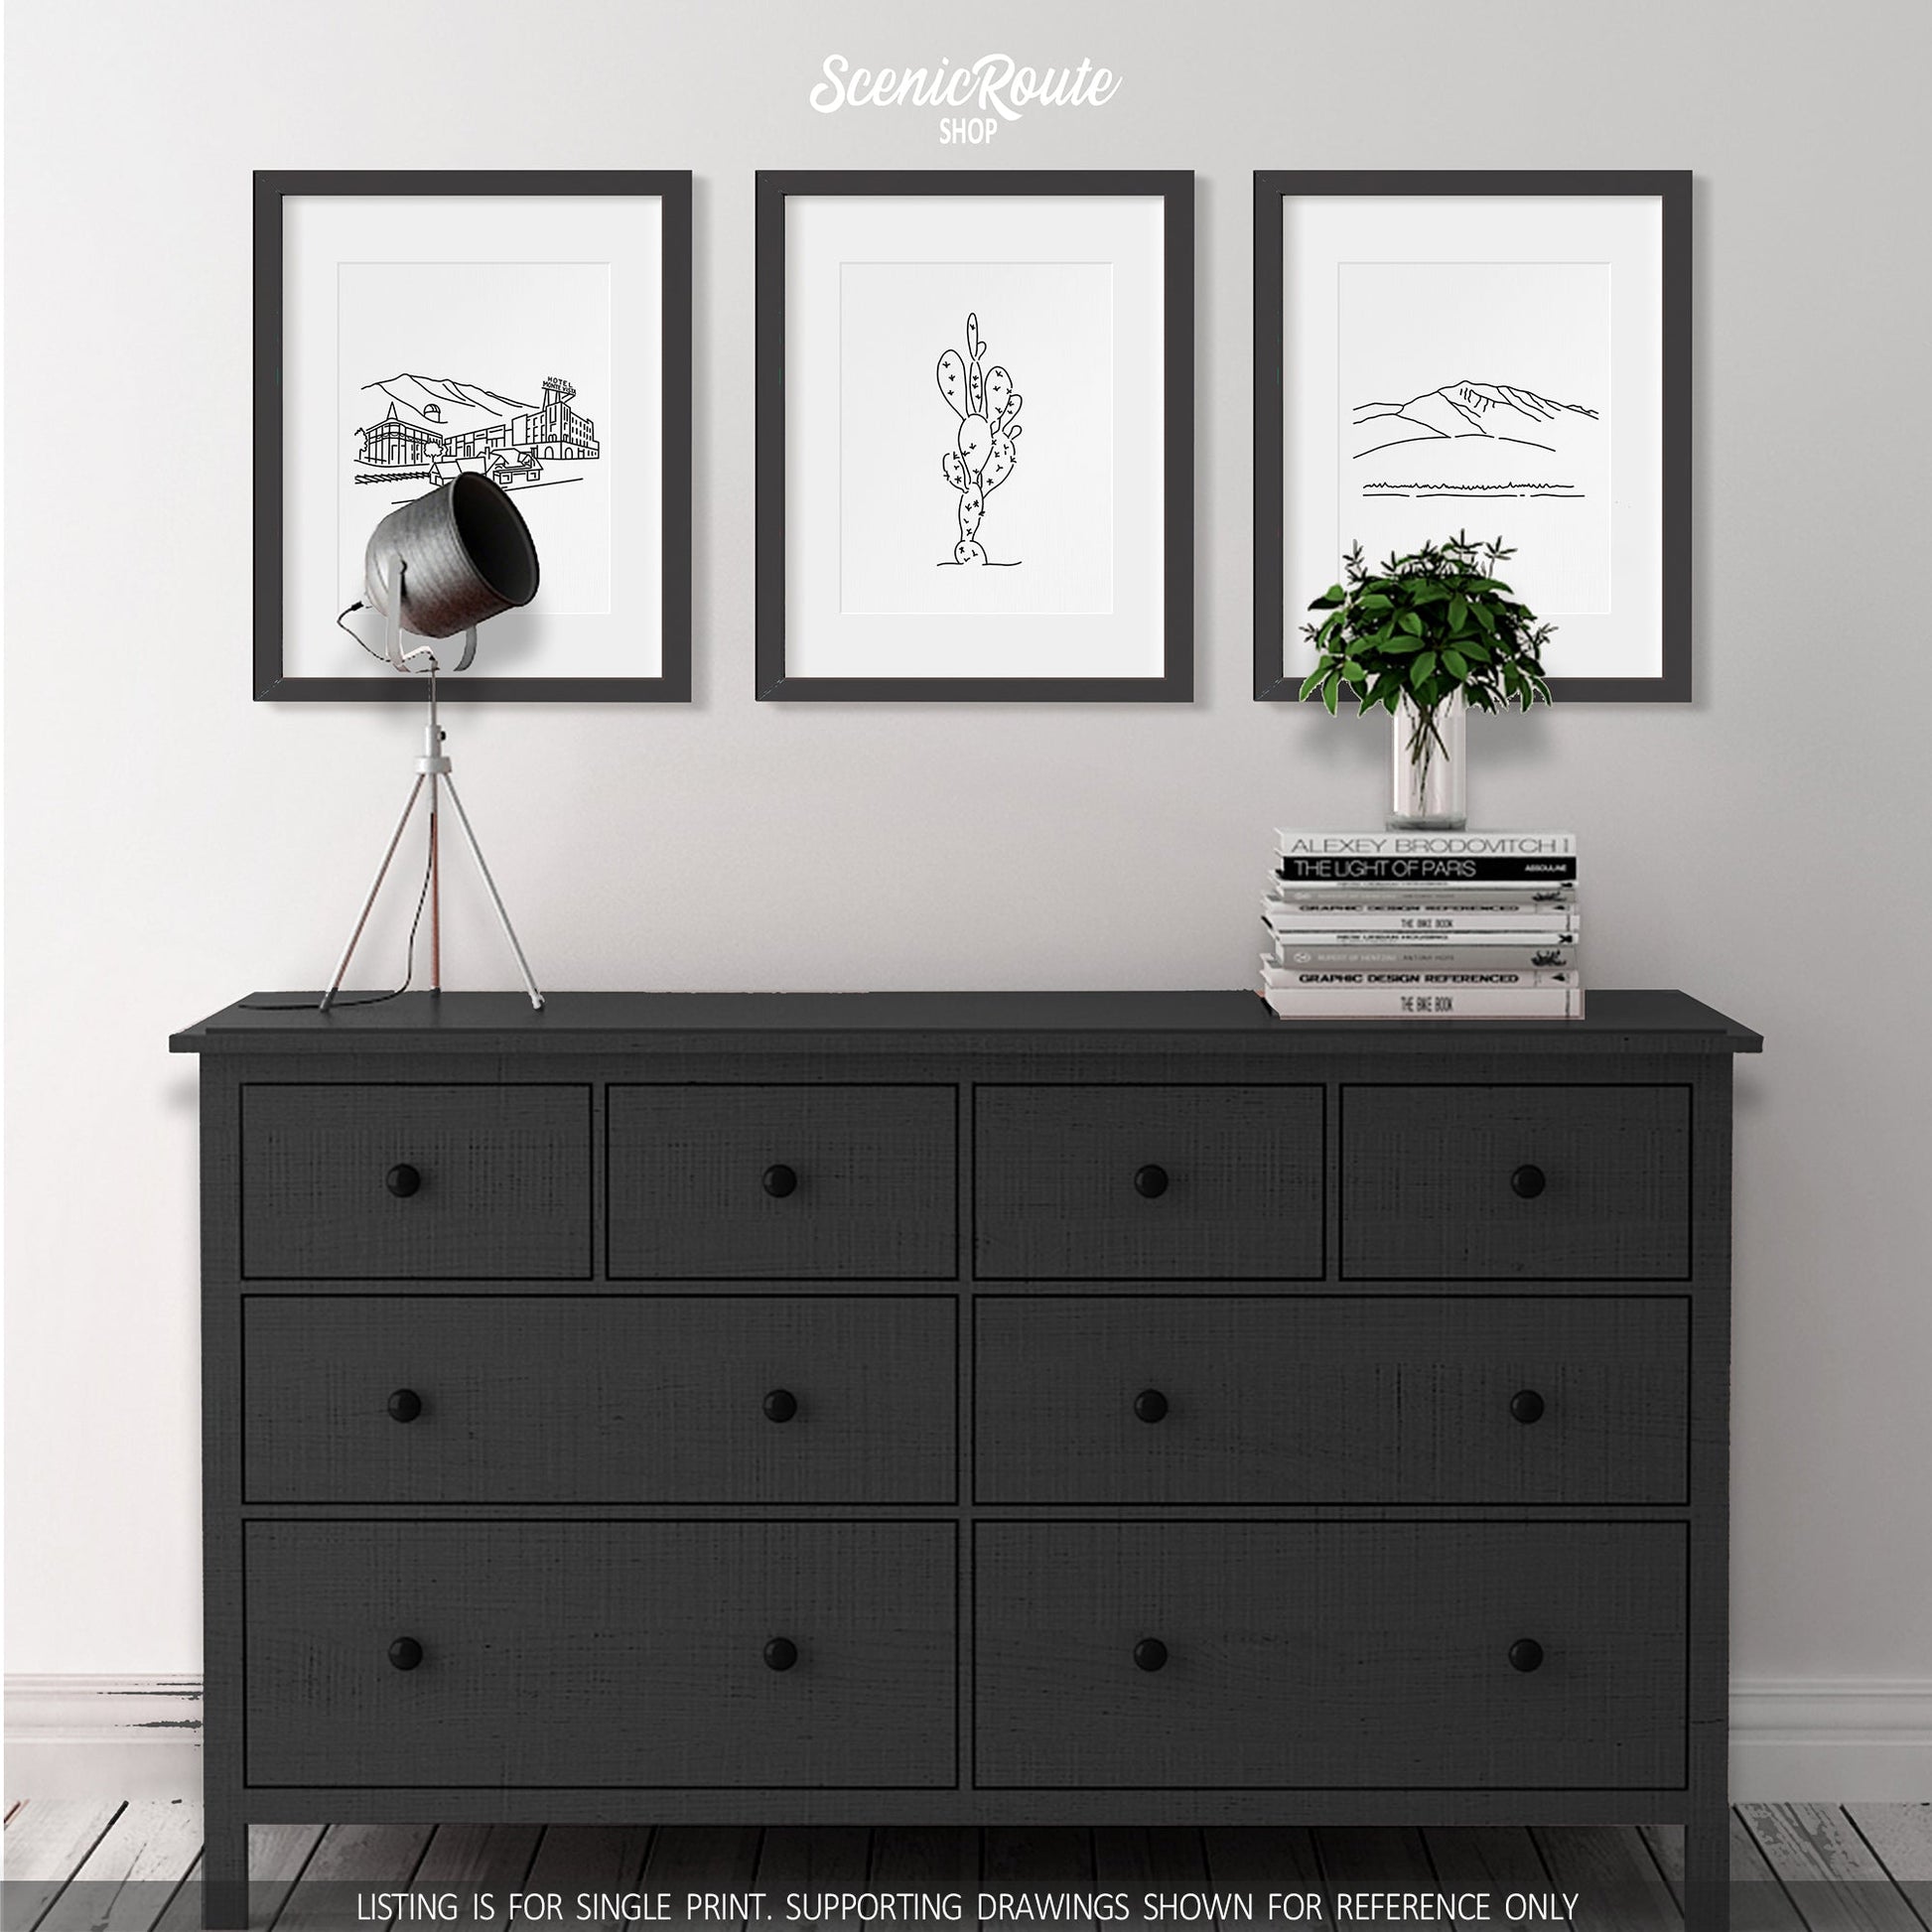 A group of three framed drawings on a wall above a dresser with books and figurines. The line art drawings include the Flagstaff Skyline, Prickly Pear Cactus, and Humphrey's Peak